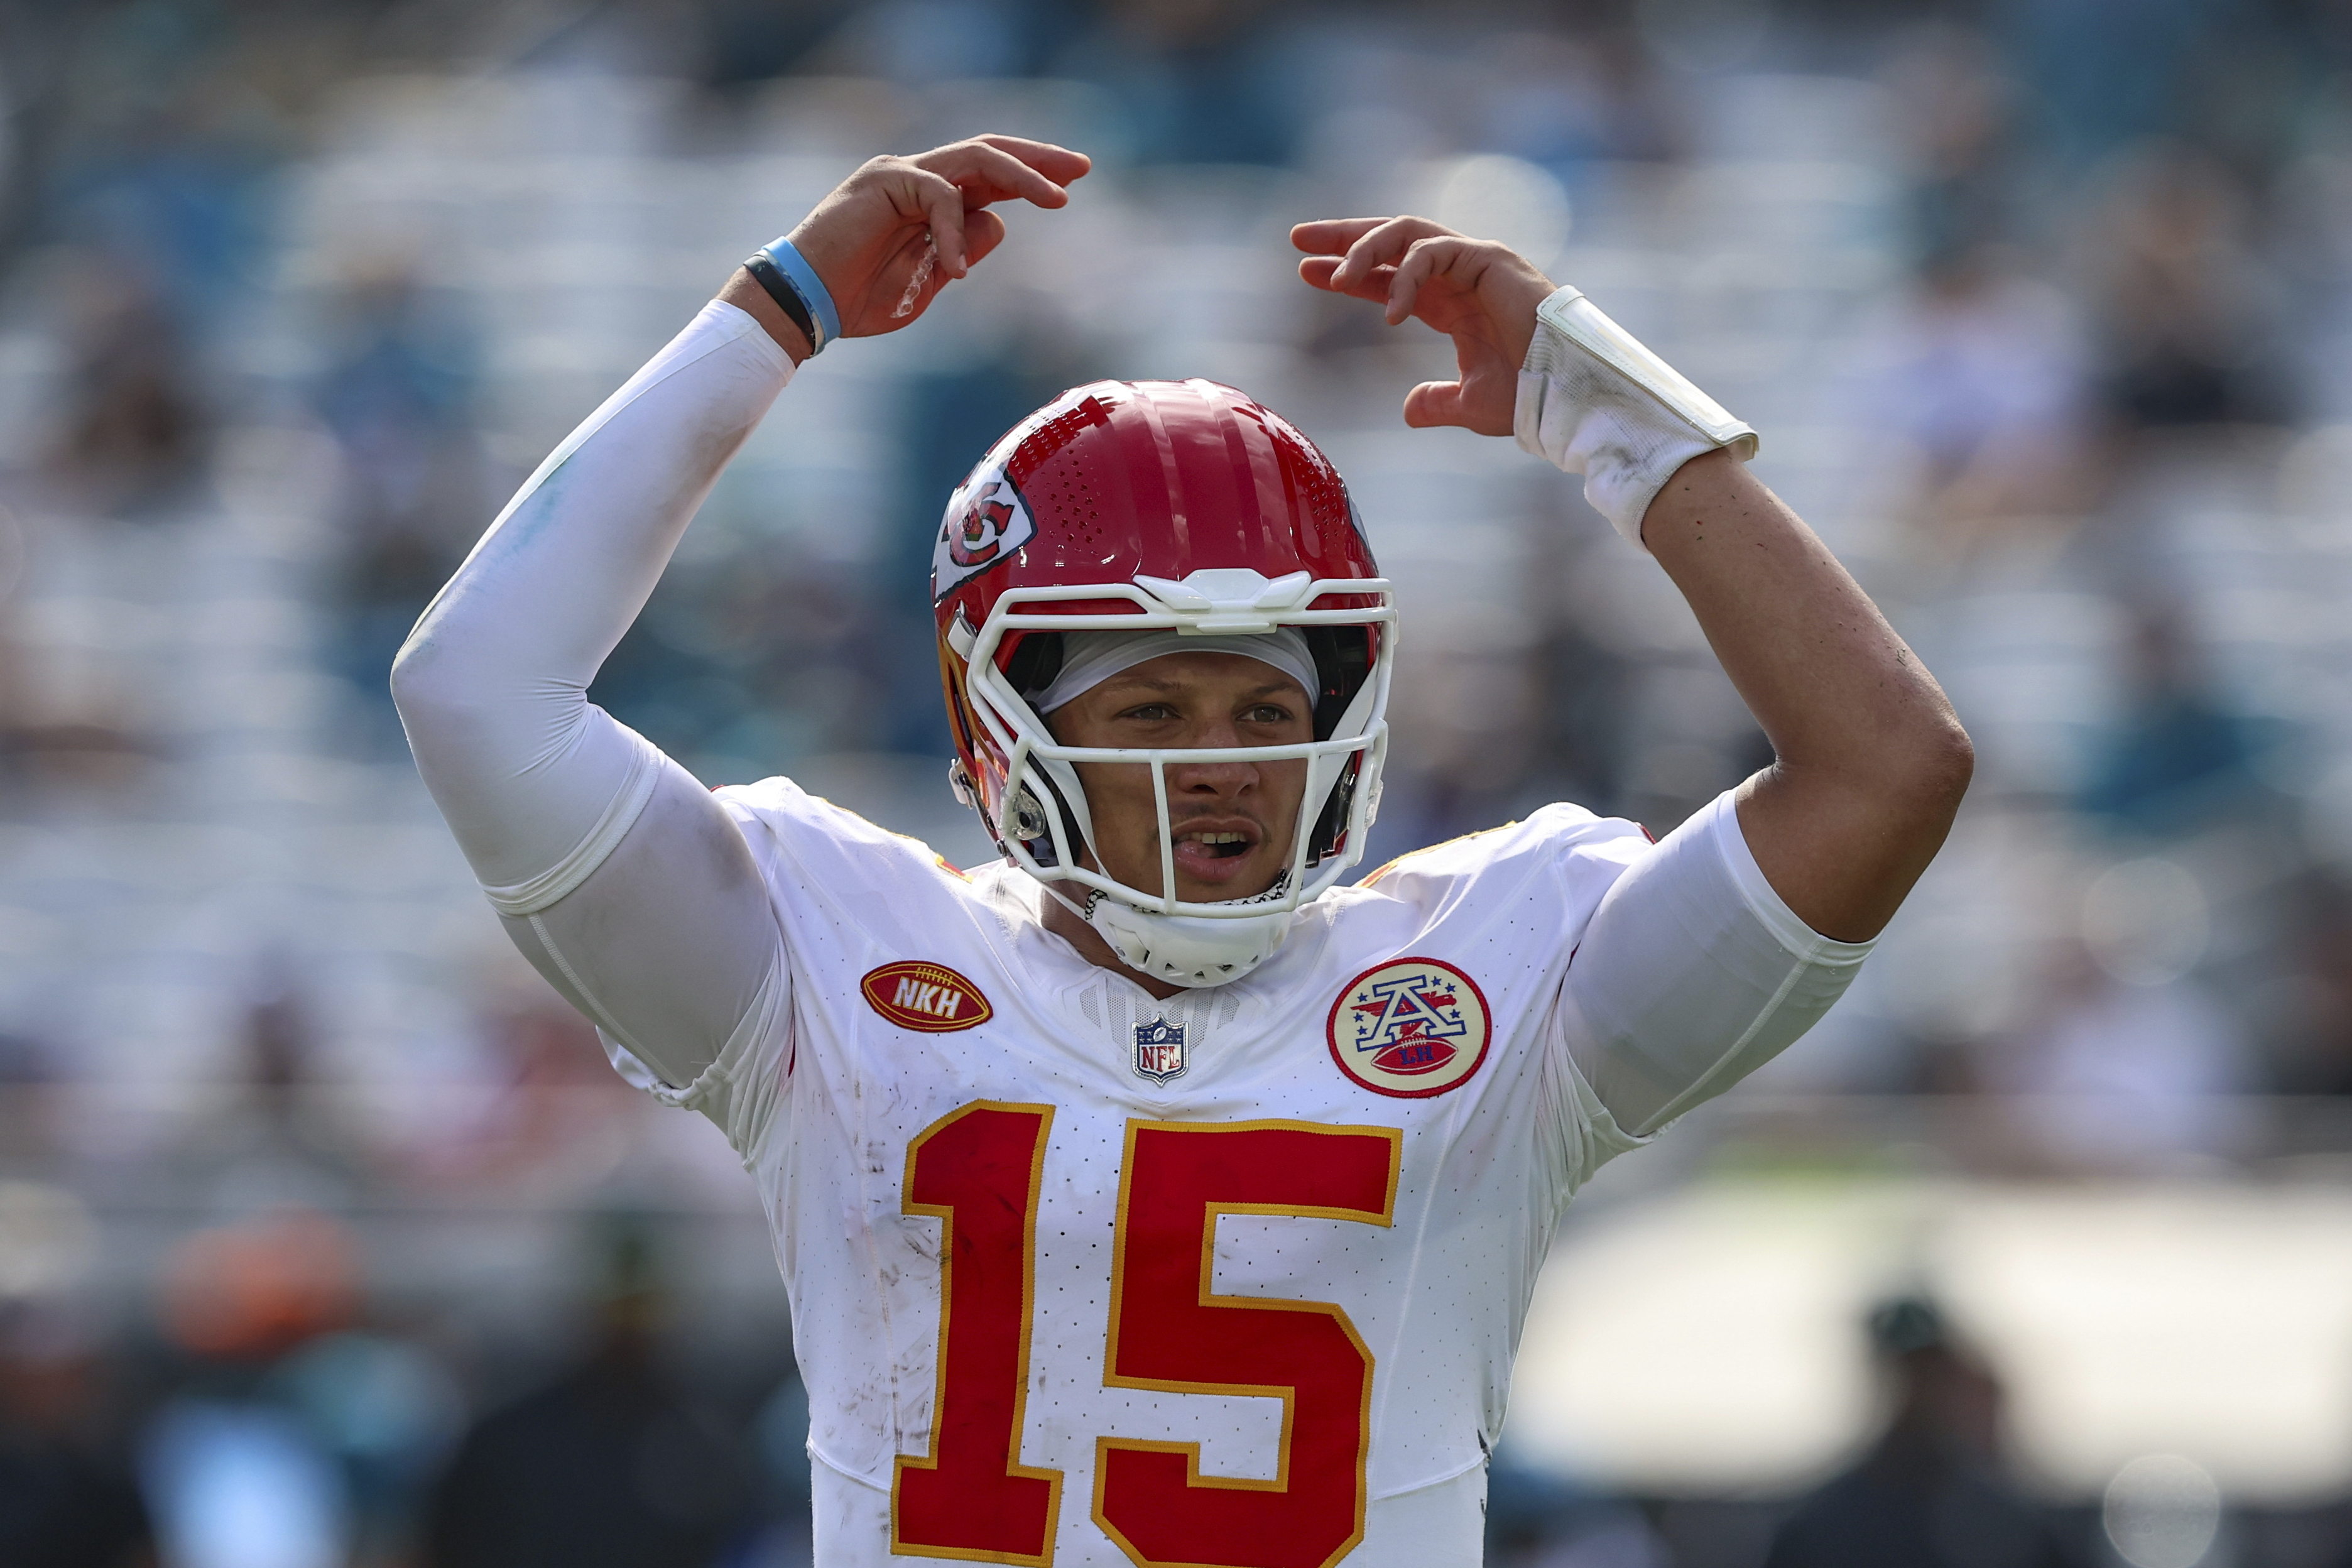 Patrick Mahomes Makes a BIG Purchase in Kansas City (Find Out What!)